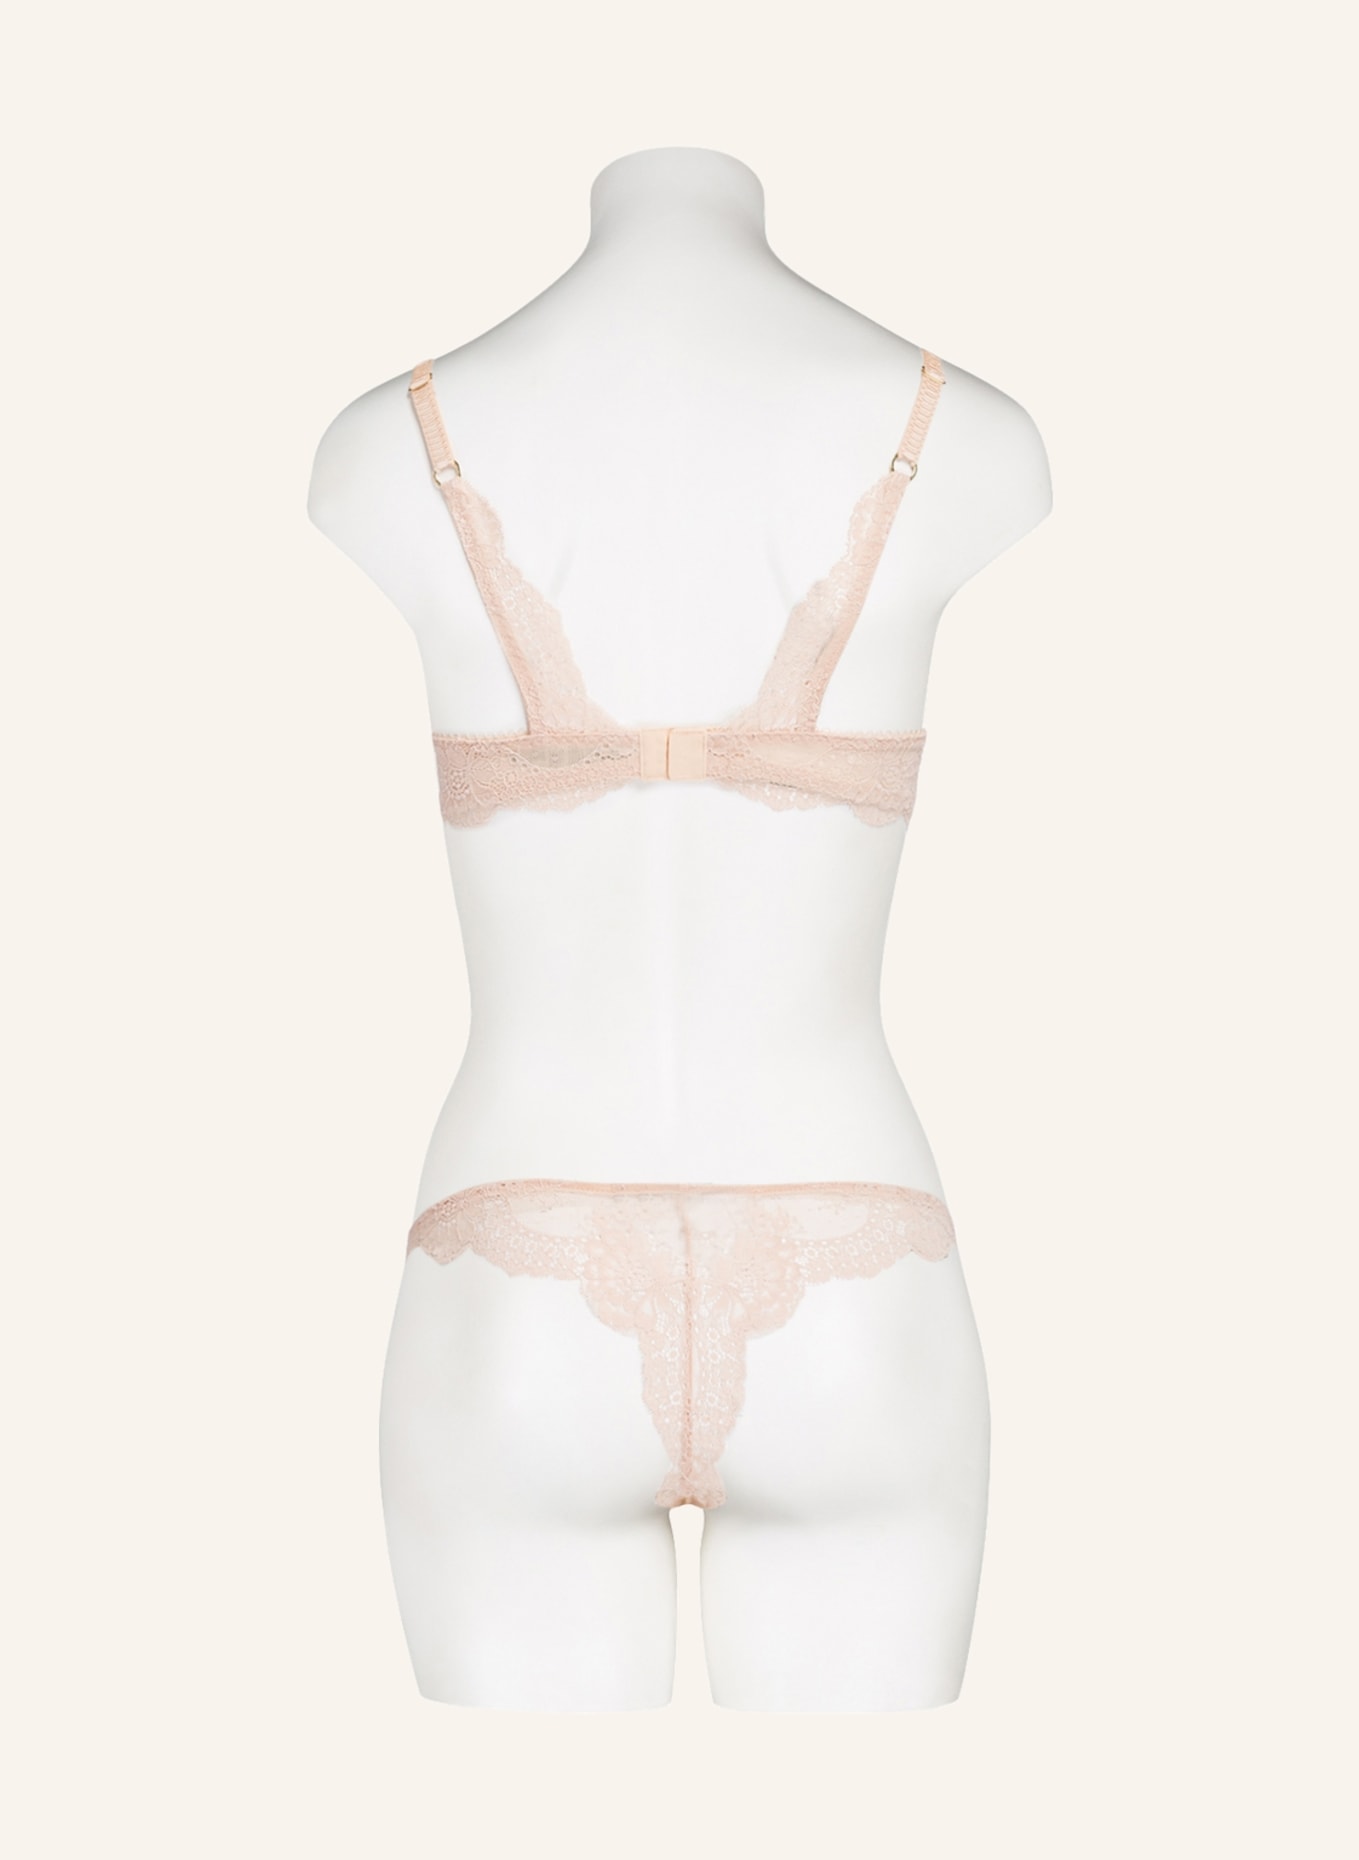 STELLA McCARTNEY LINGERIE Push-up-BH SMOOTH & LACE, Farbe: NUDE (Bild 3)